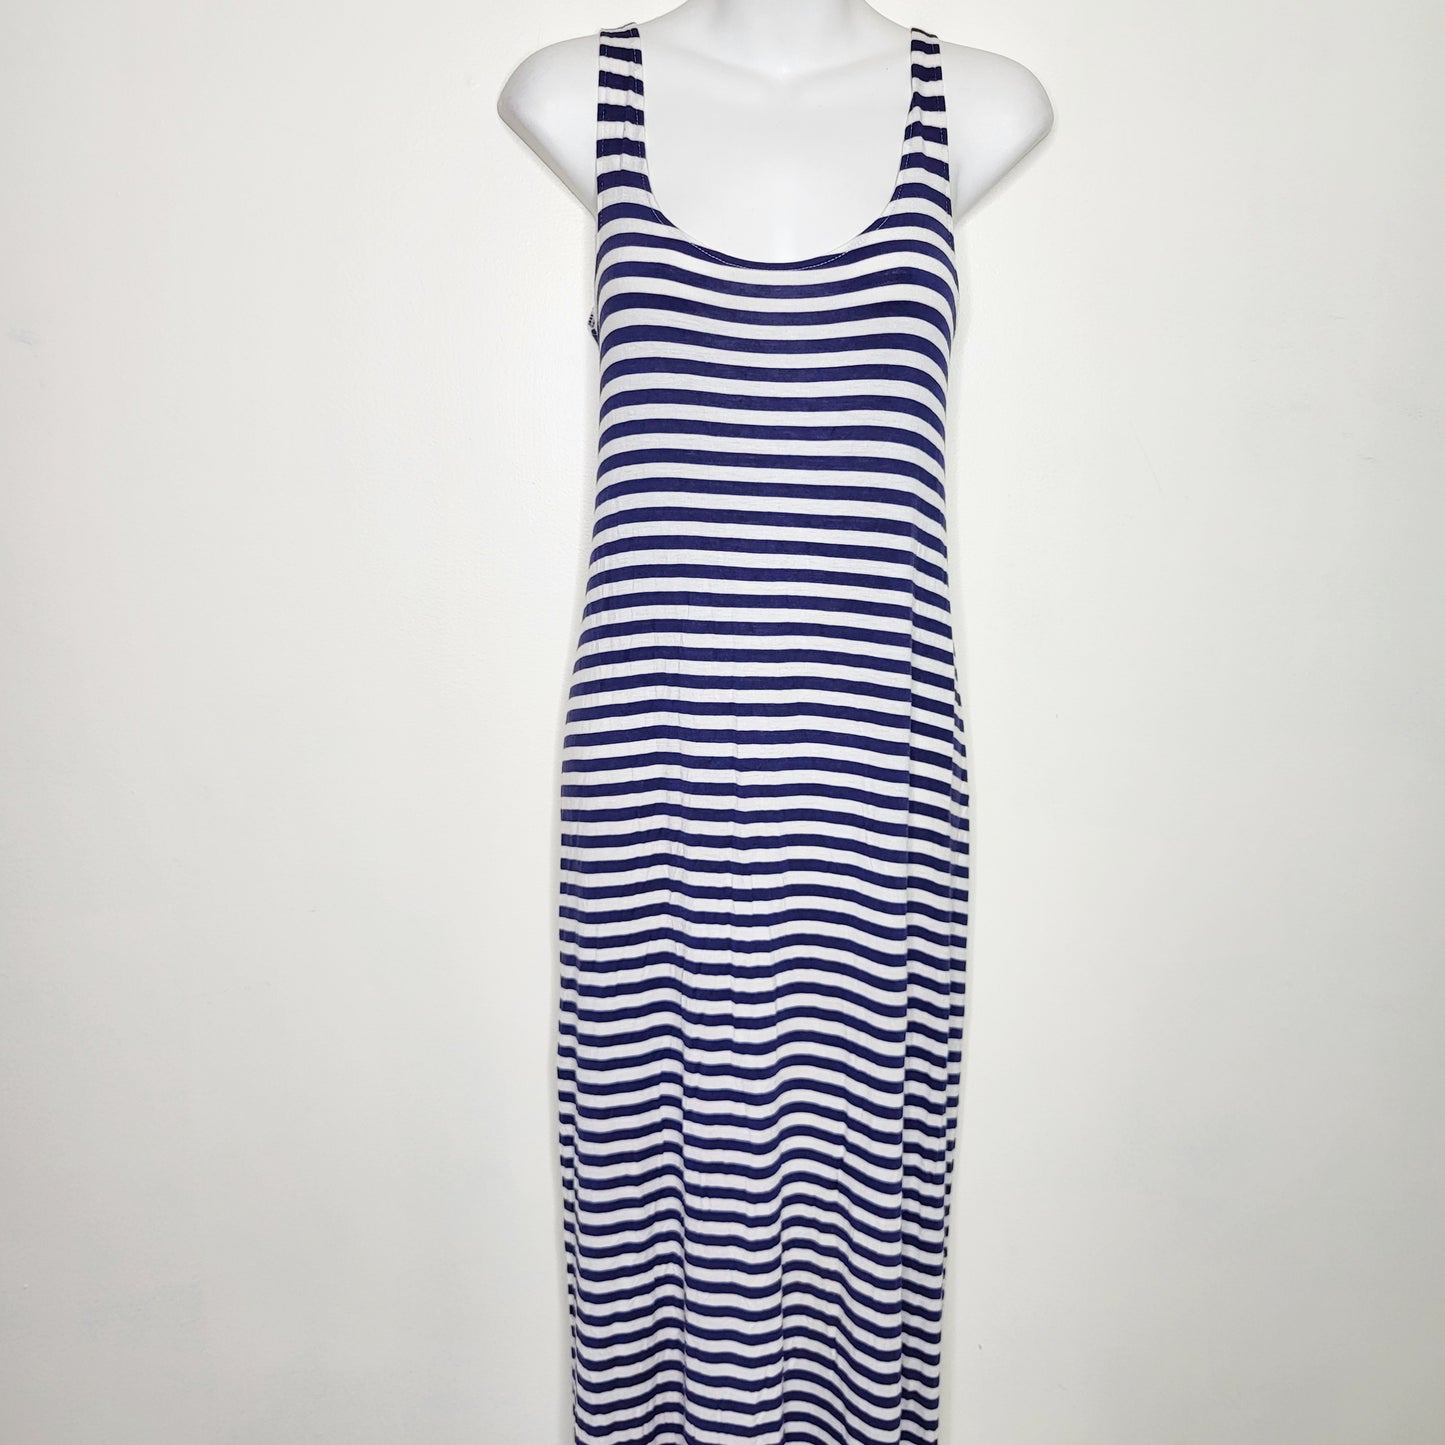 CSWRTZ1 - O'neill navy striped maxi dress with scoop back, size medium, good condition